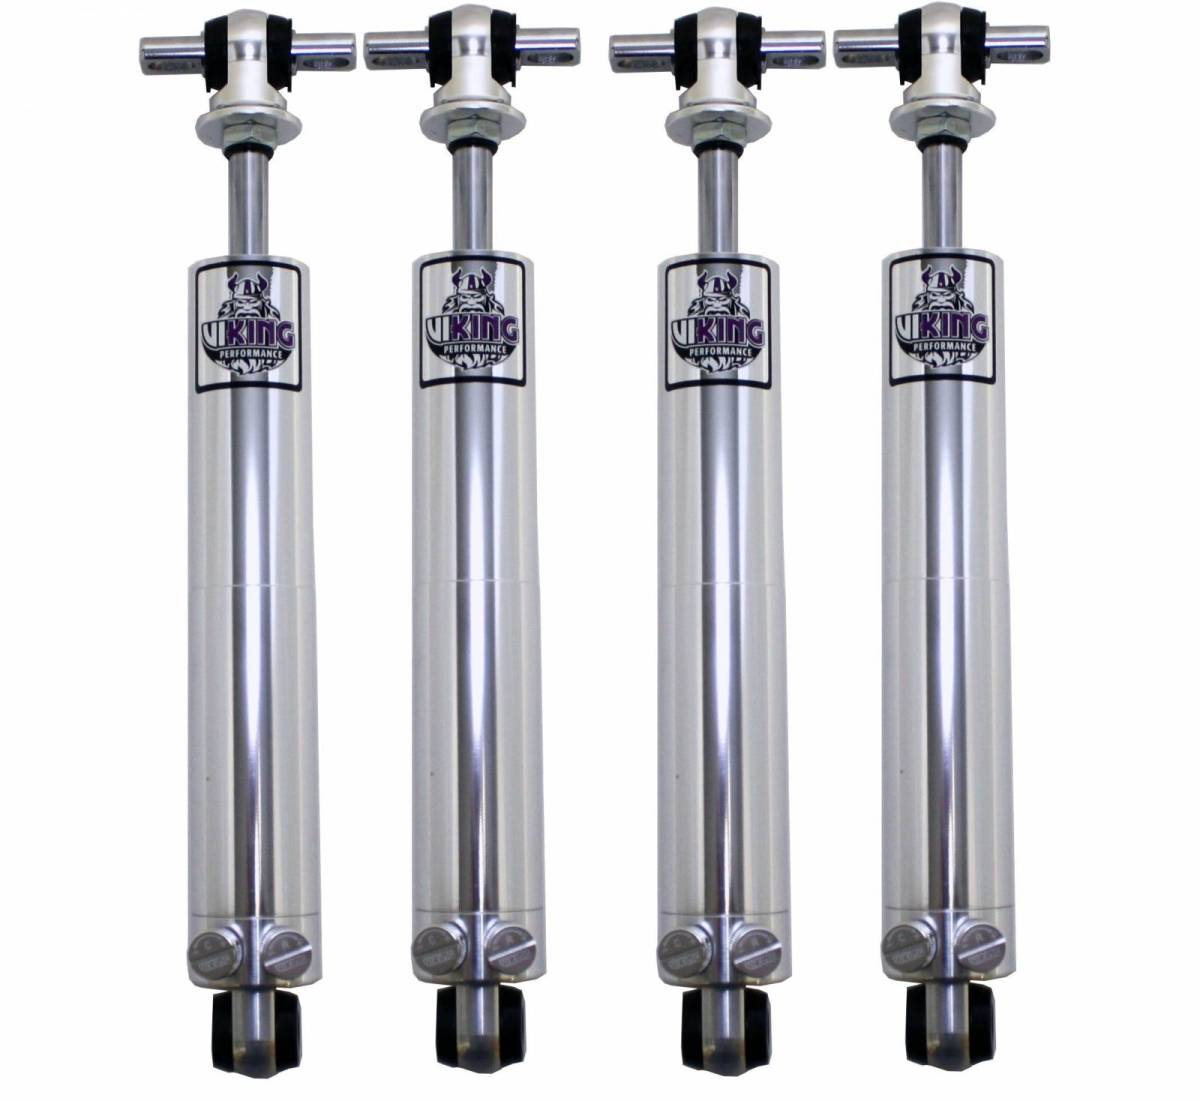 1965-1982 Ford Full Size, 1965-1982 Mercury Full Size - Viking Voyager 4 Pack Smooth Bodied Shock Absorber Set - VSK307 - Kanter Auto